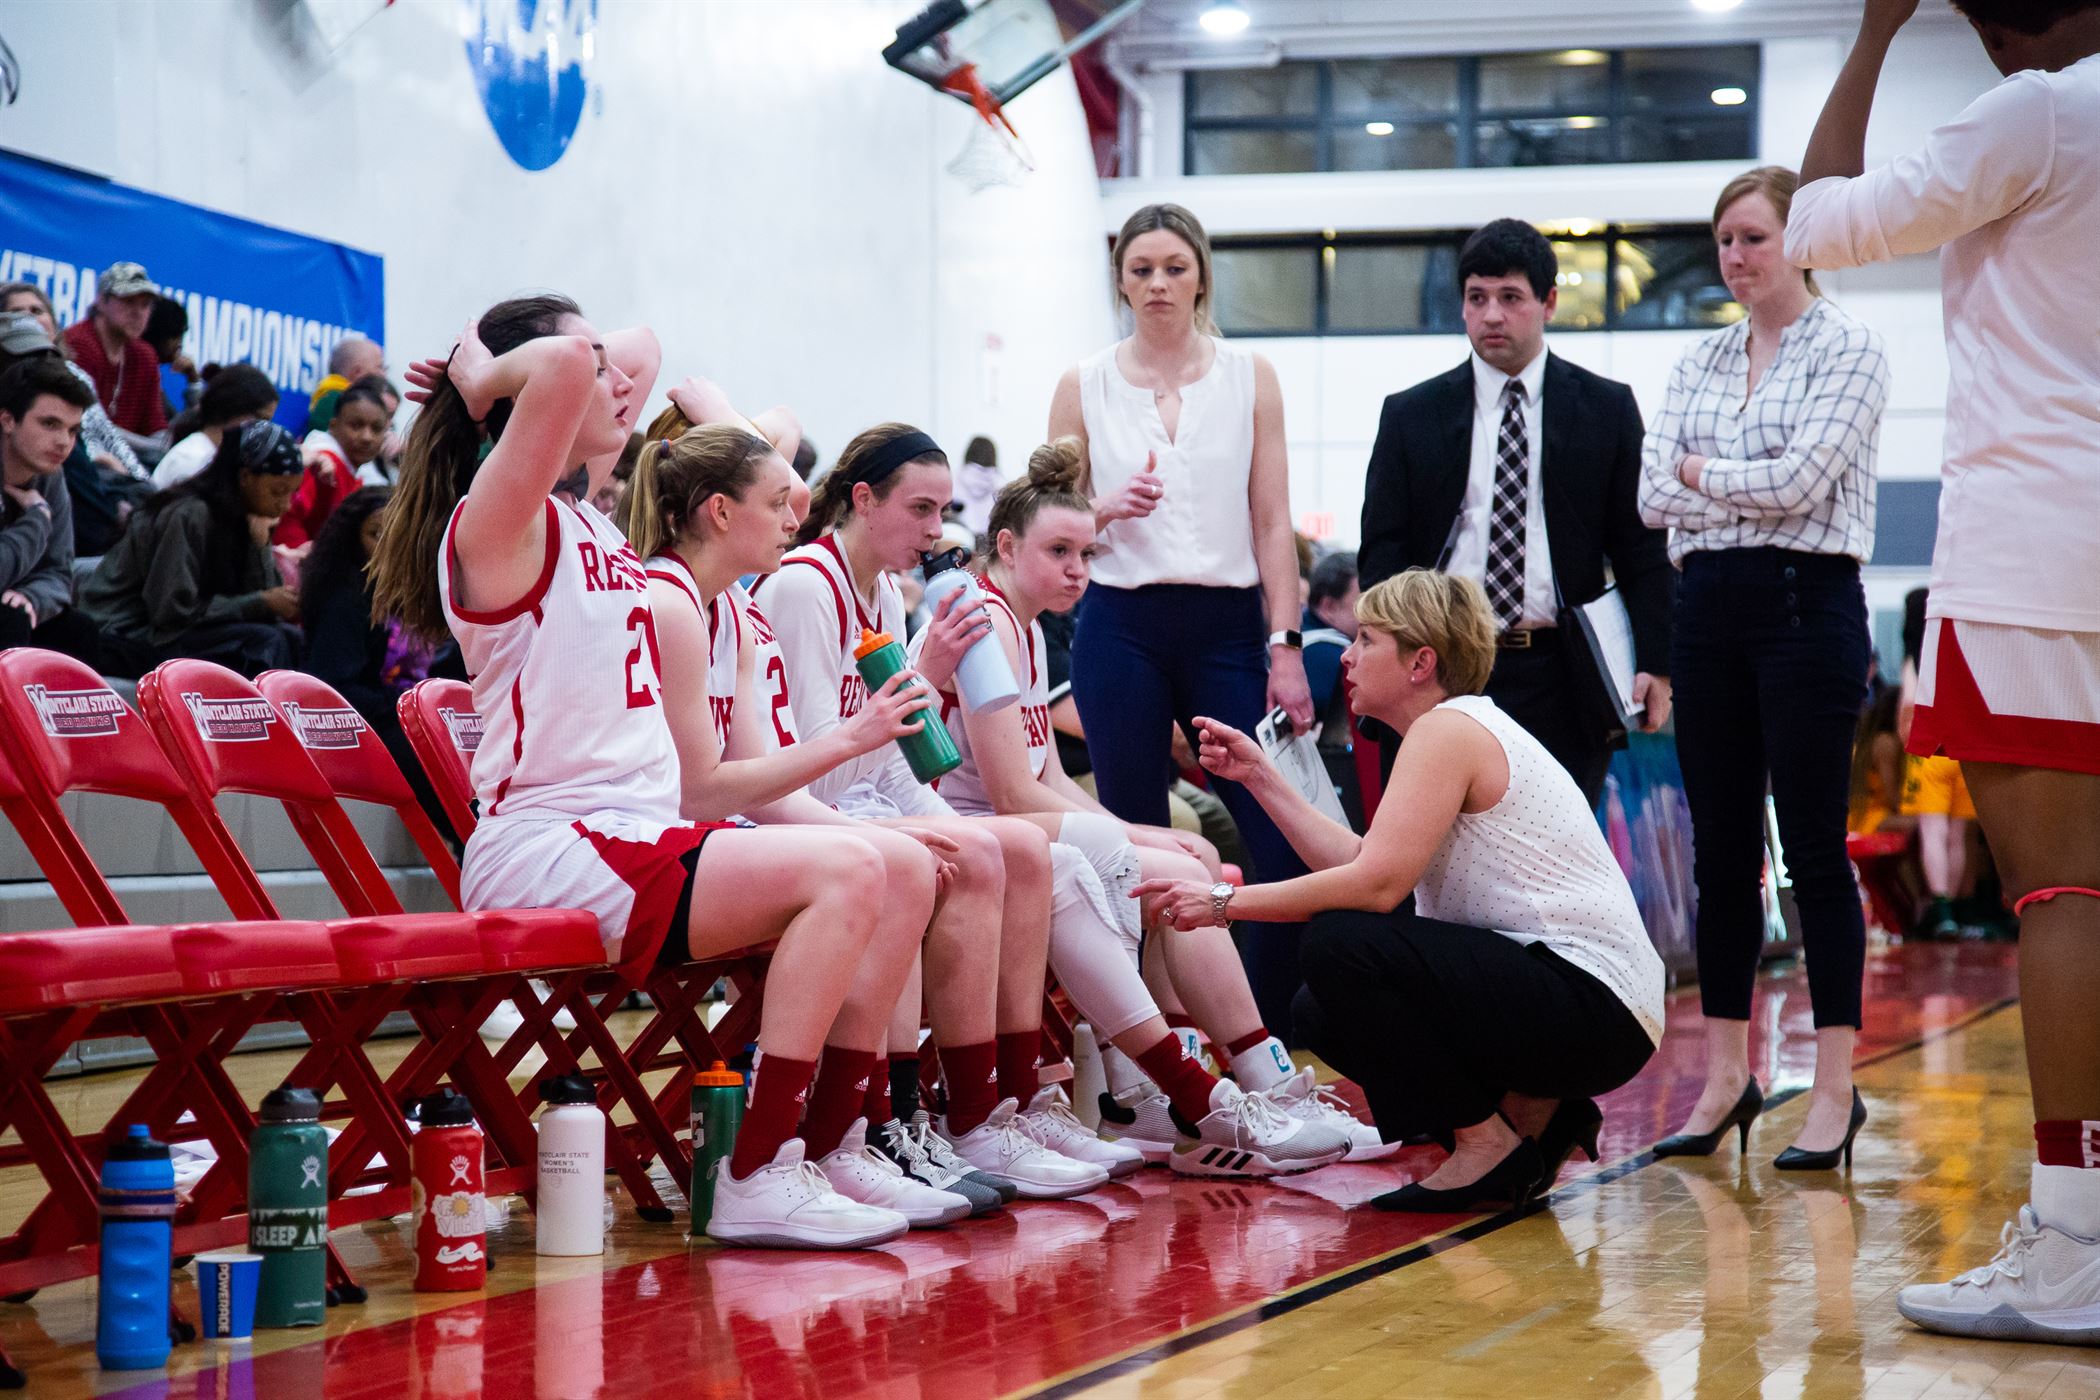 Head coach Karin Harvey talks to her team during the game. Chris Krusberg | The Montclarion